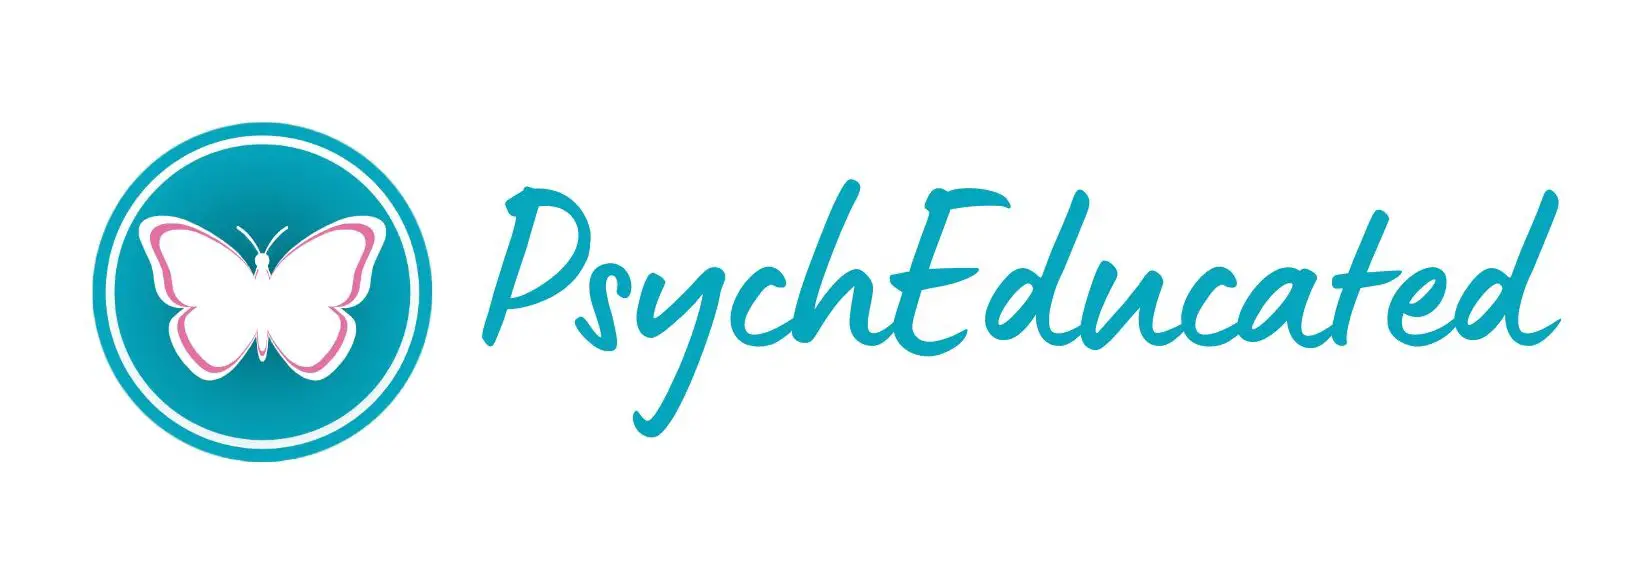 PsychEducated